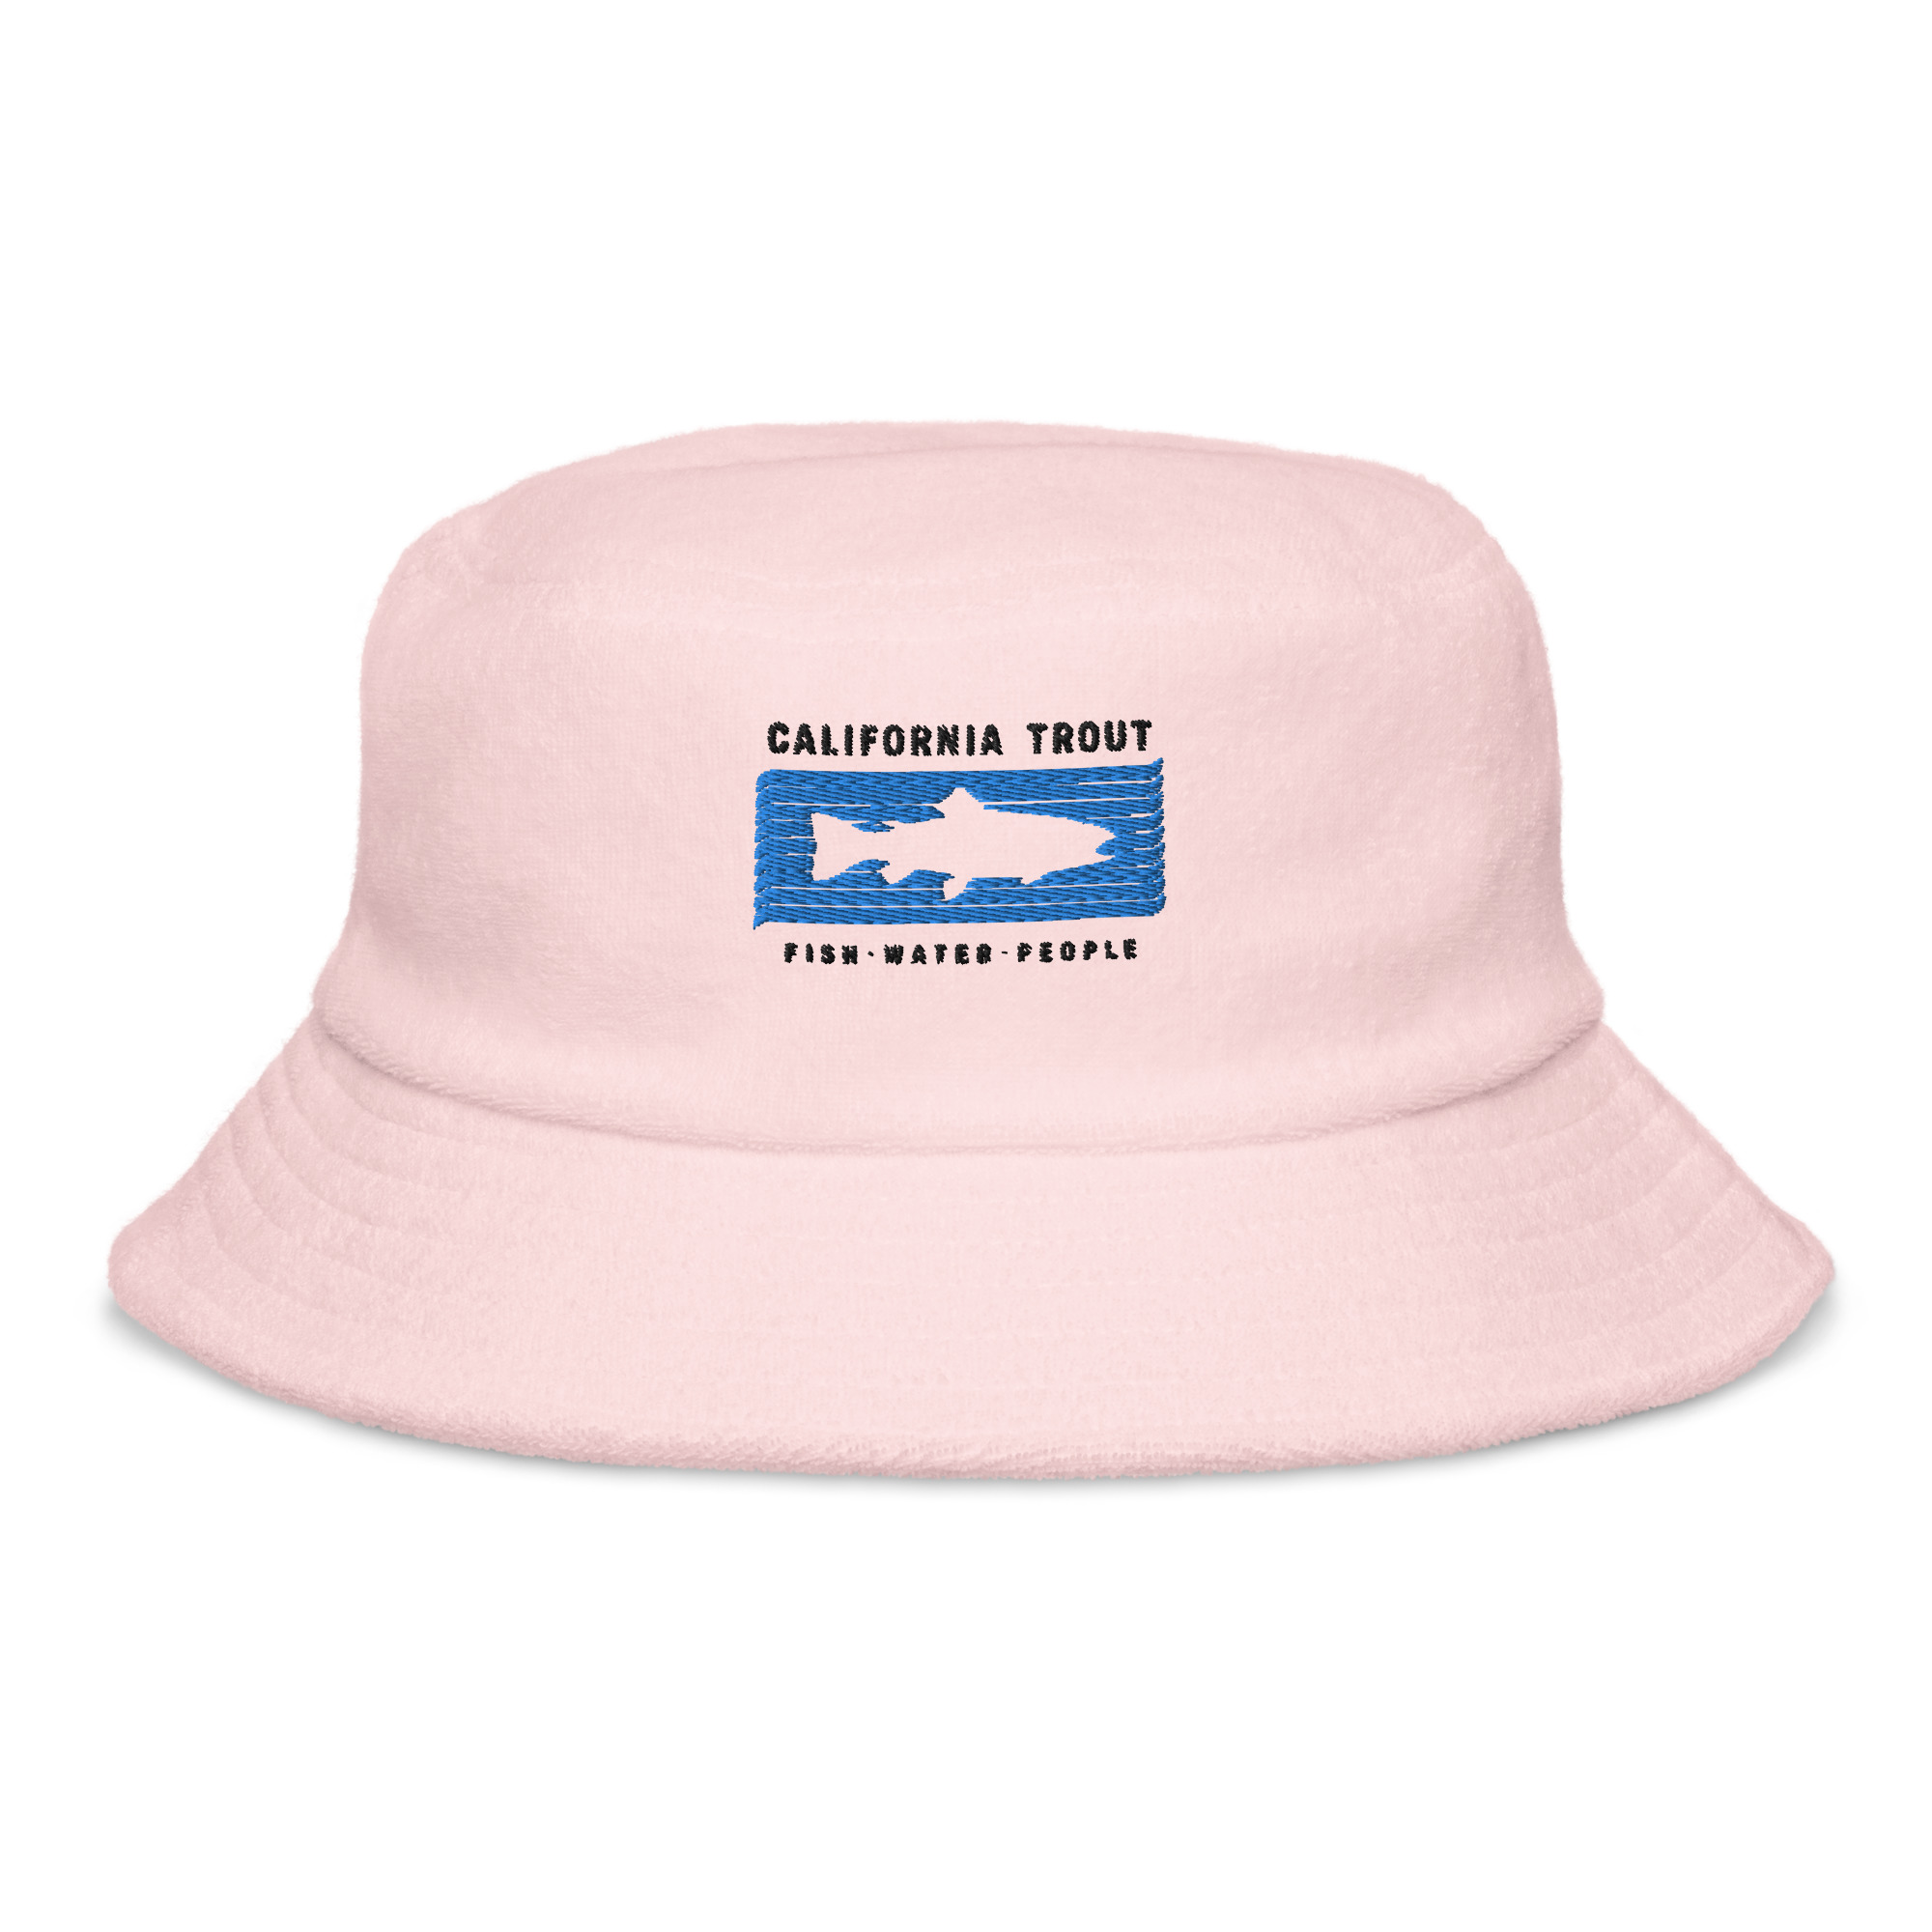 https://caltrout.org/wp-content/uploads/2022/07/terry-cloth-bucket-hat-light-pink-front-62d05a3fc44ea.jpg